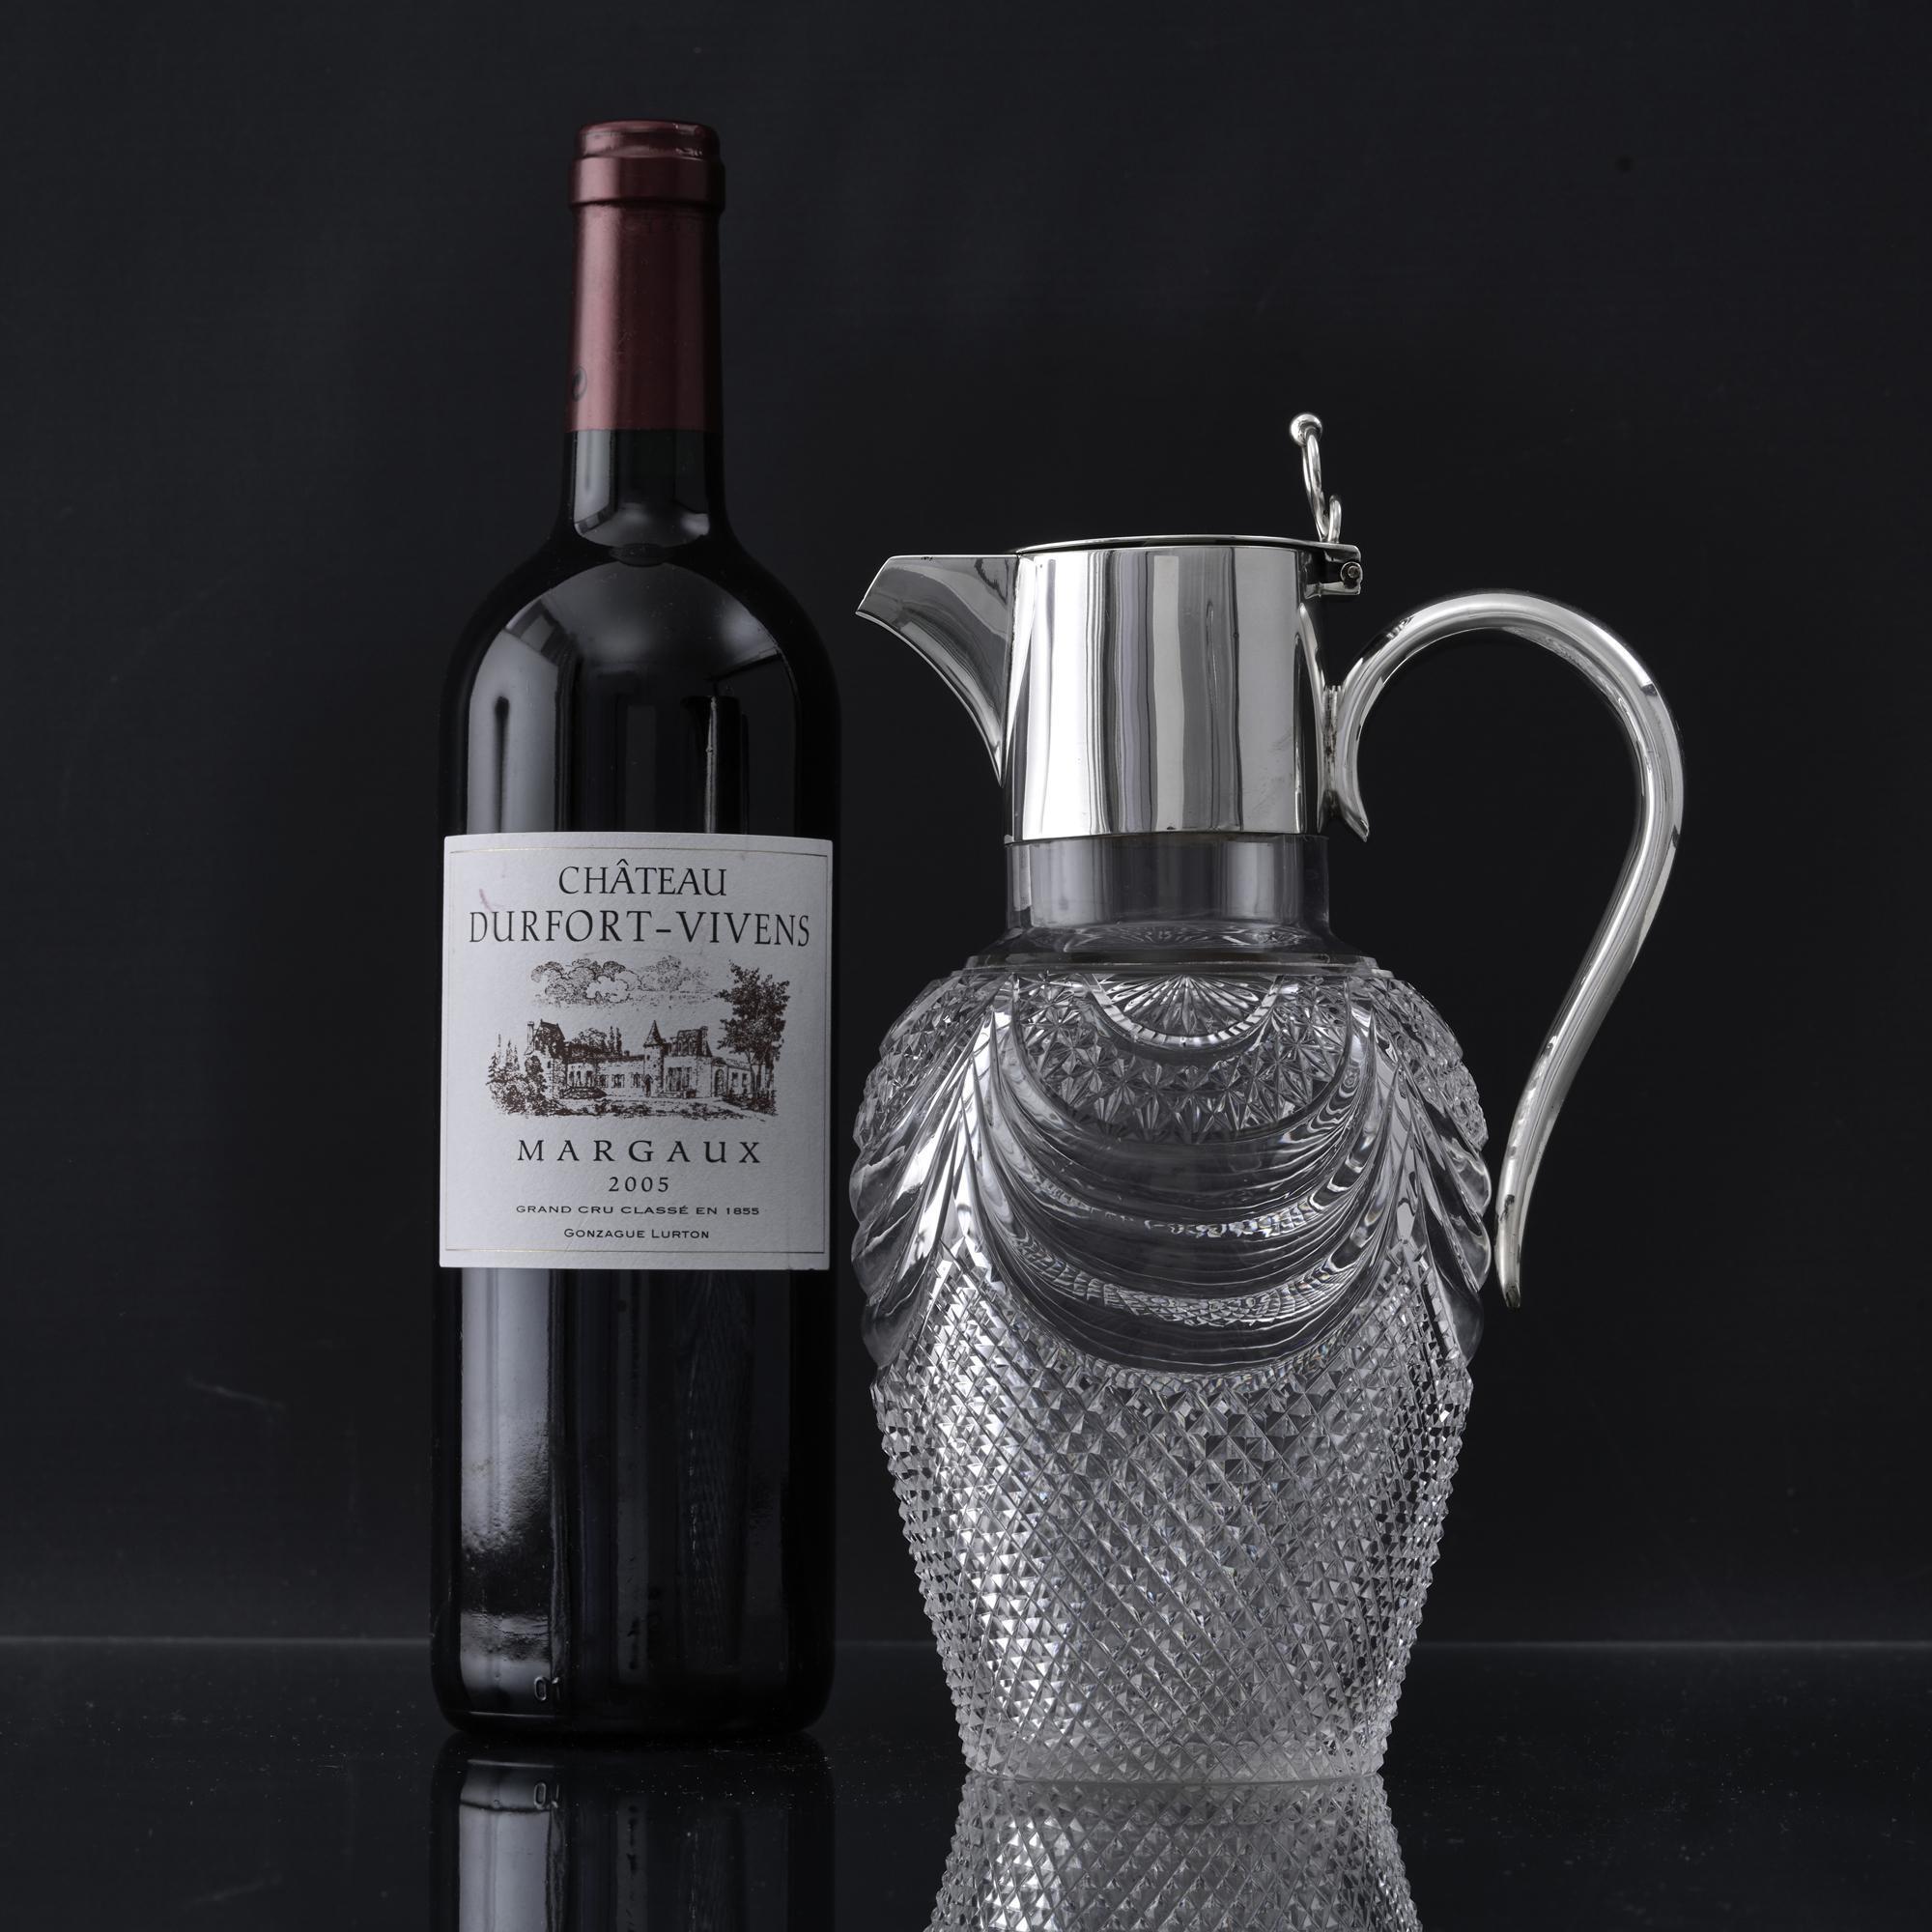 Inverted pear-shaped, antique, cut-glass claret jug with plain sterling silver mounts and an elegant swan-neck silver handle.  The lower part of the crystal body has been finely cut with a faceted pattern, while the upper section includes swag